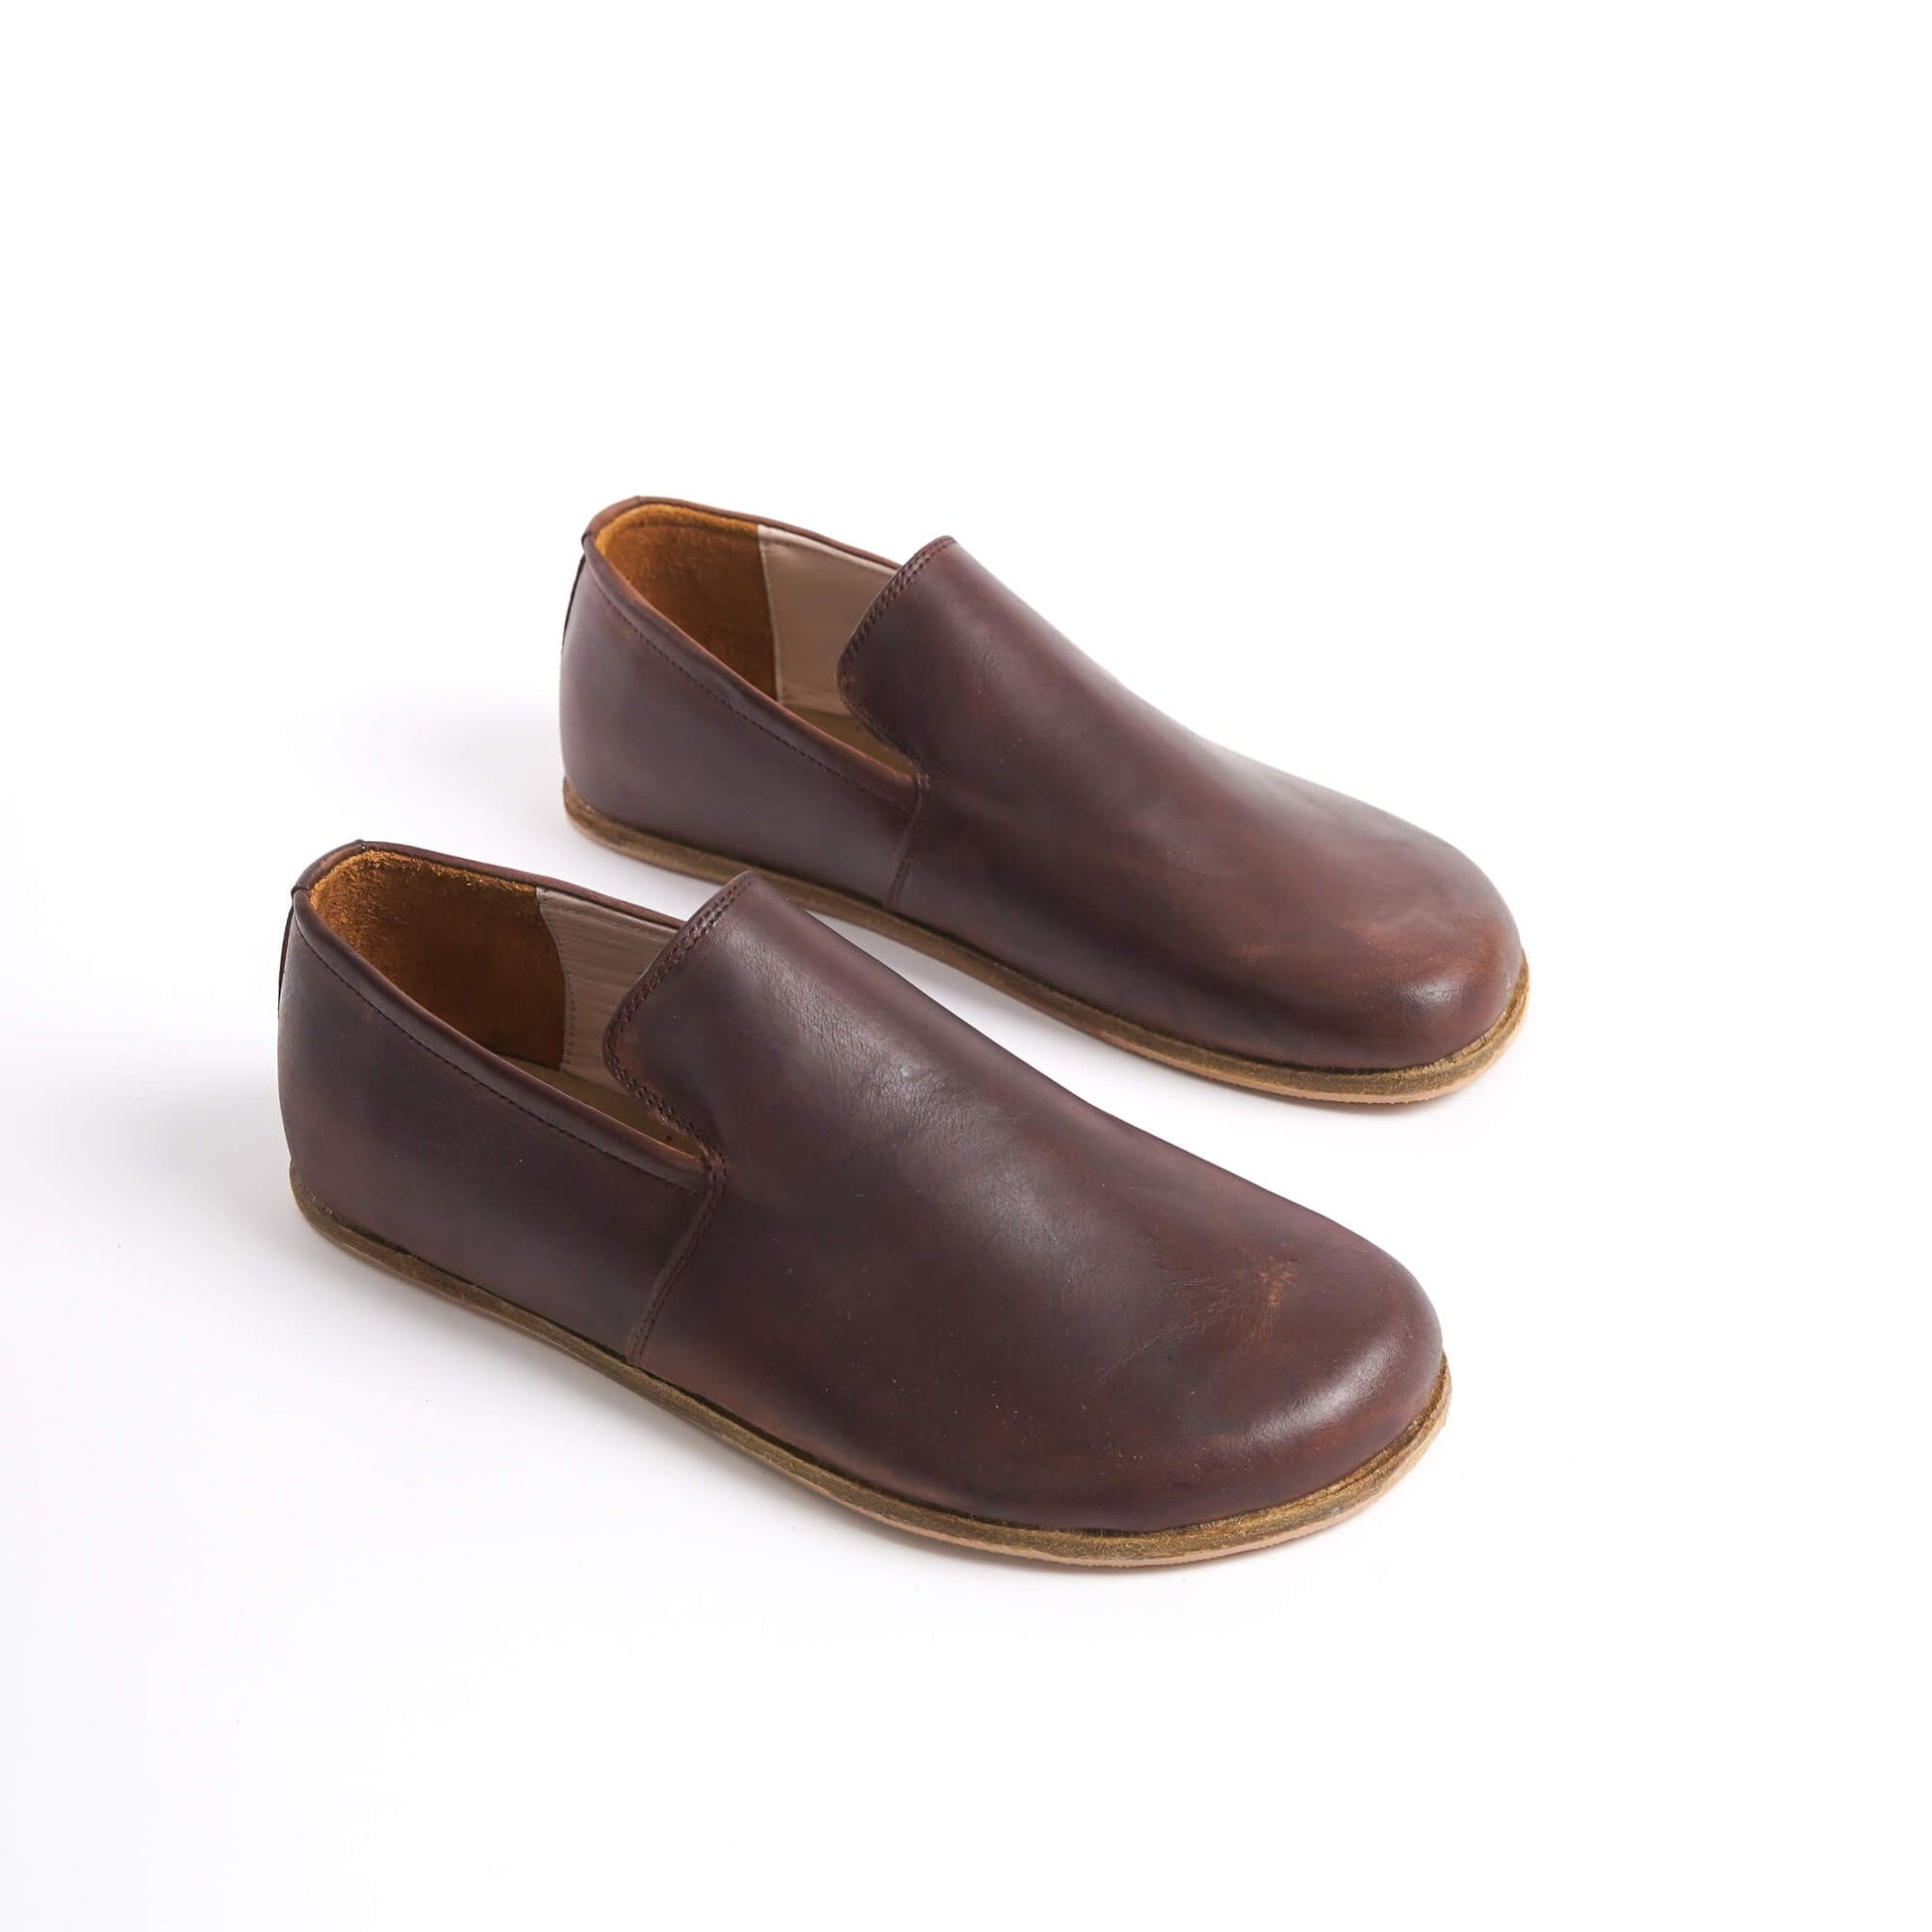 Aeolia leather barefoot men loafers in brown - top view, showcasing genuine leather and minimalist design for natural foot movement. Shop at pelanir.com!